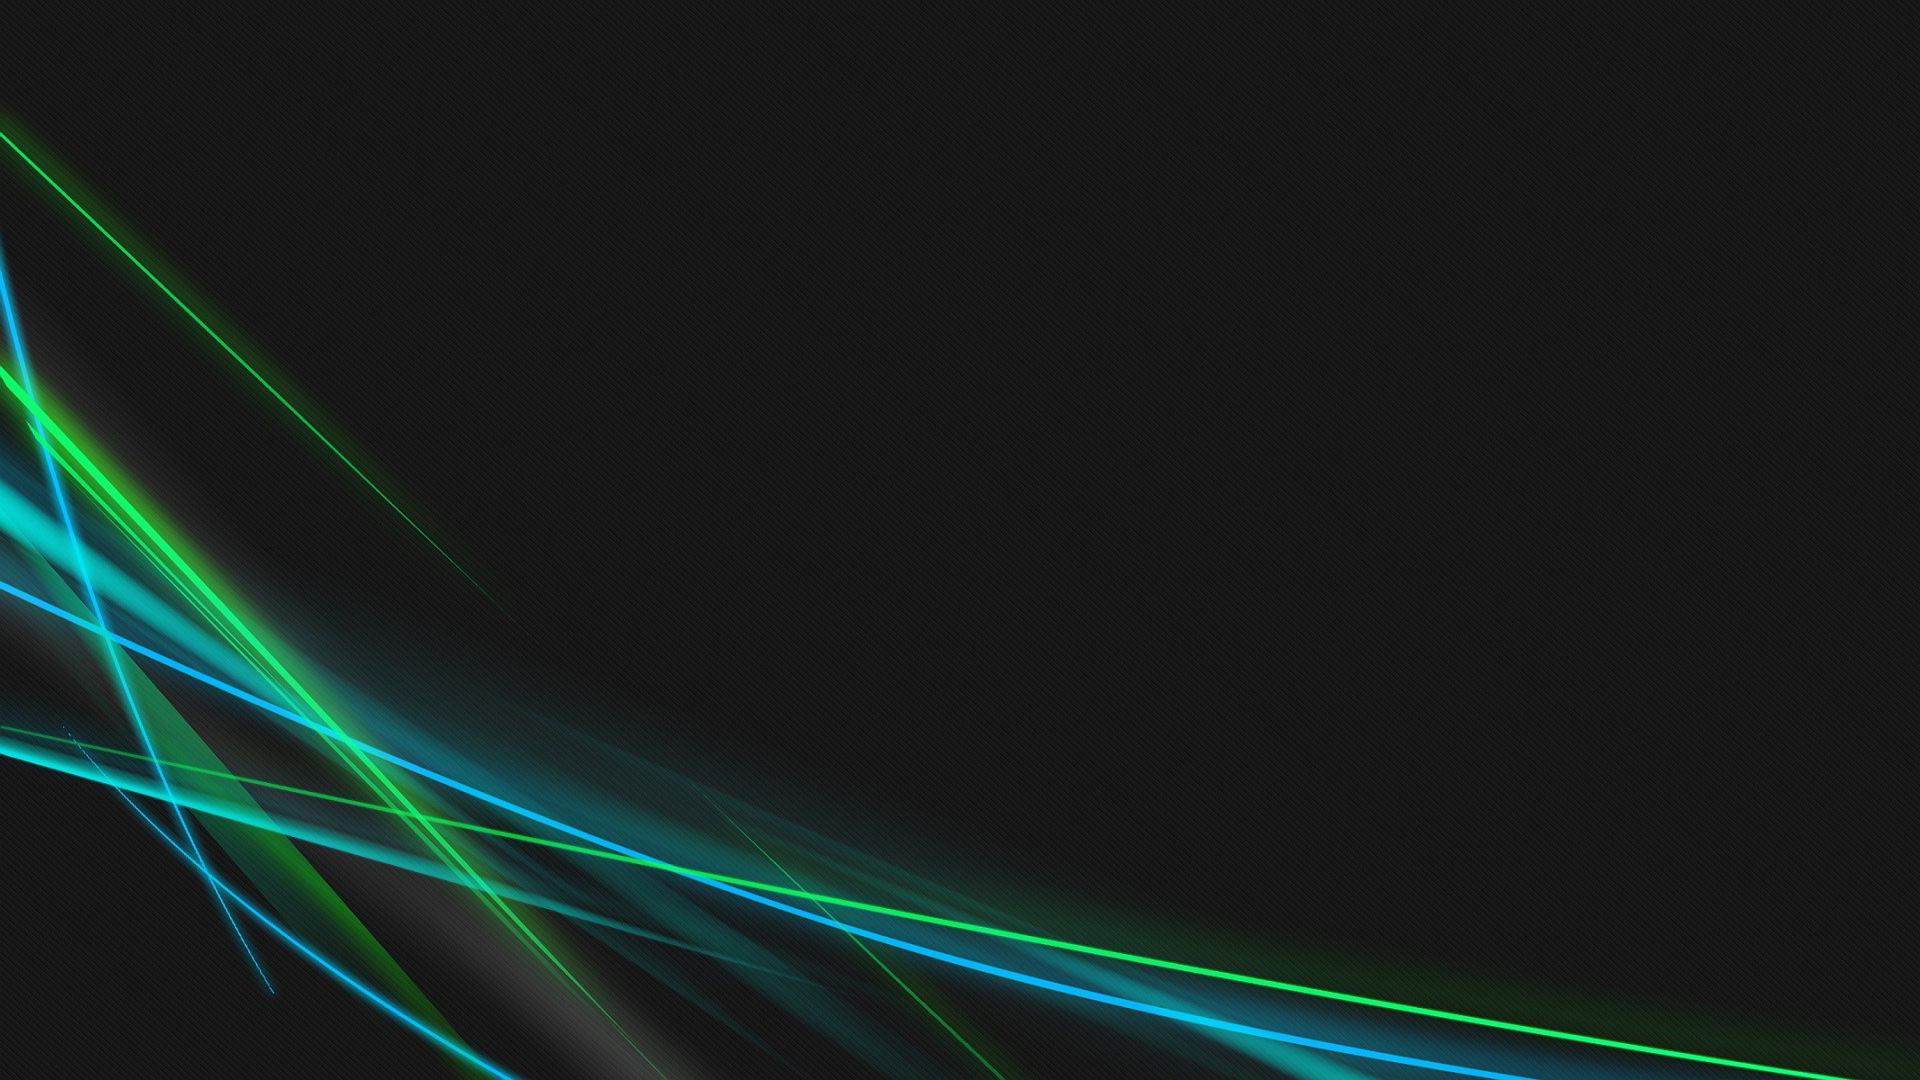 1920x1080 Blue and green neon curves wallpaper - 578863